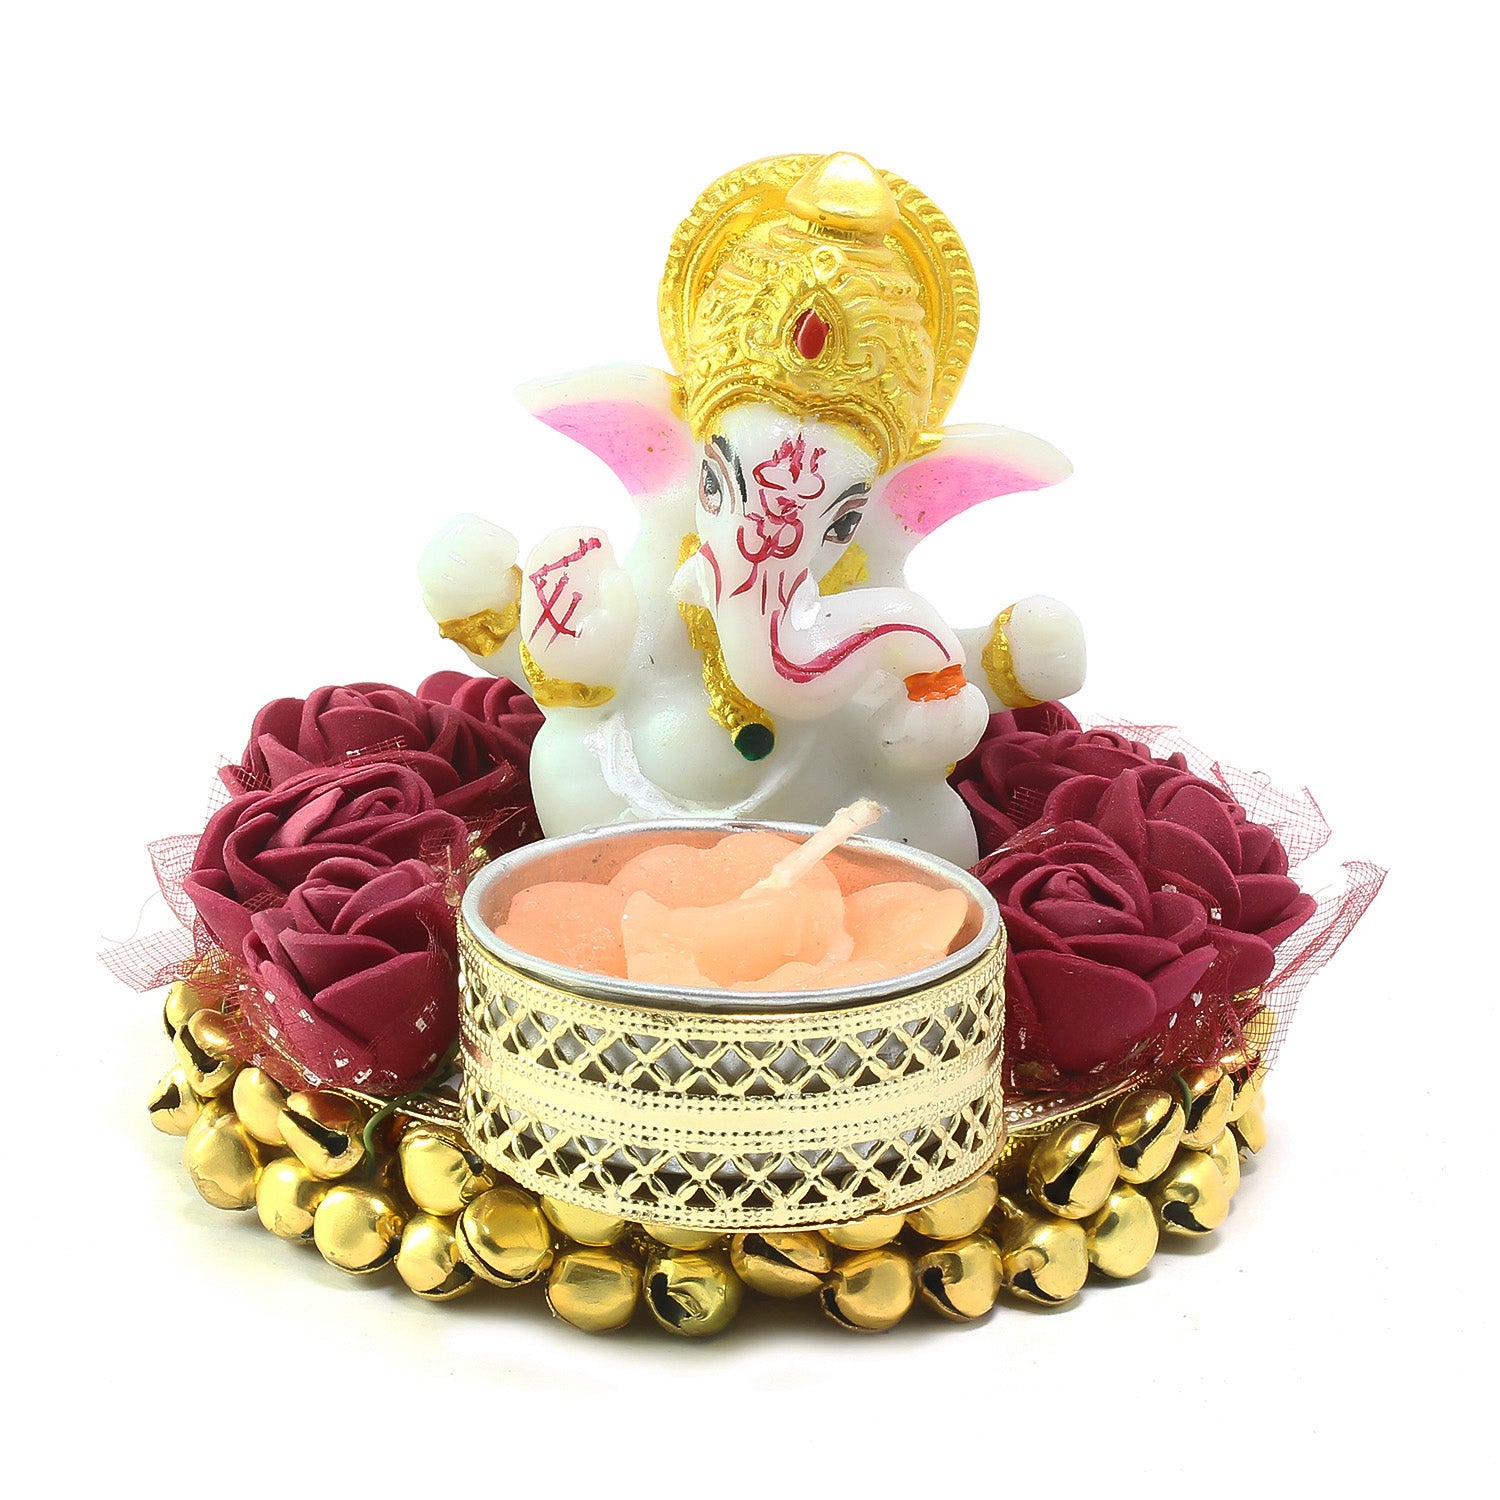 Metal and Polyresin Lord Ganesha Idol on Decorative Plate with Tea Light Candle Holder 1